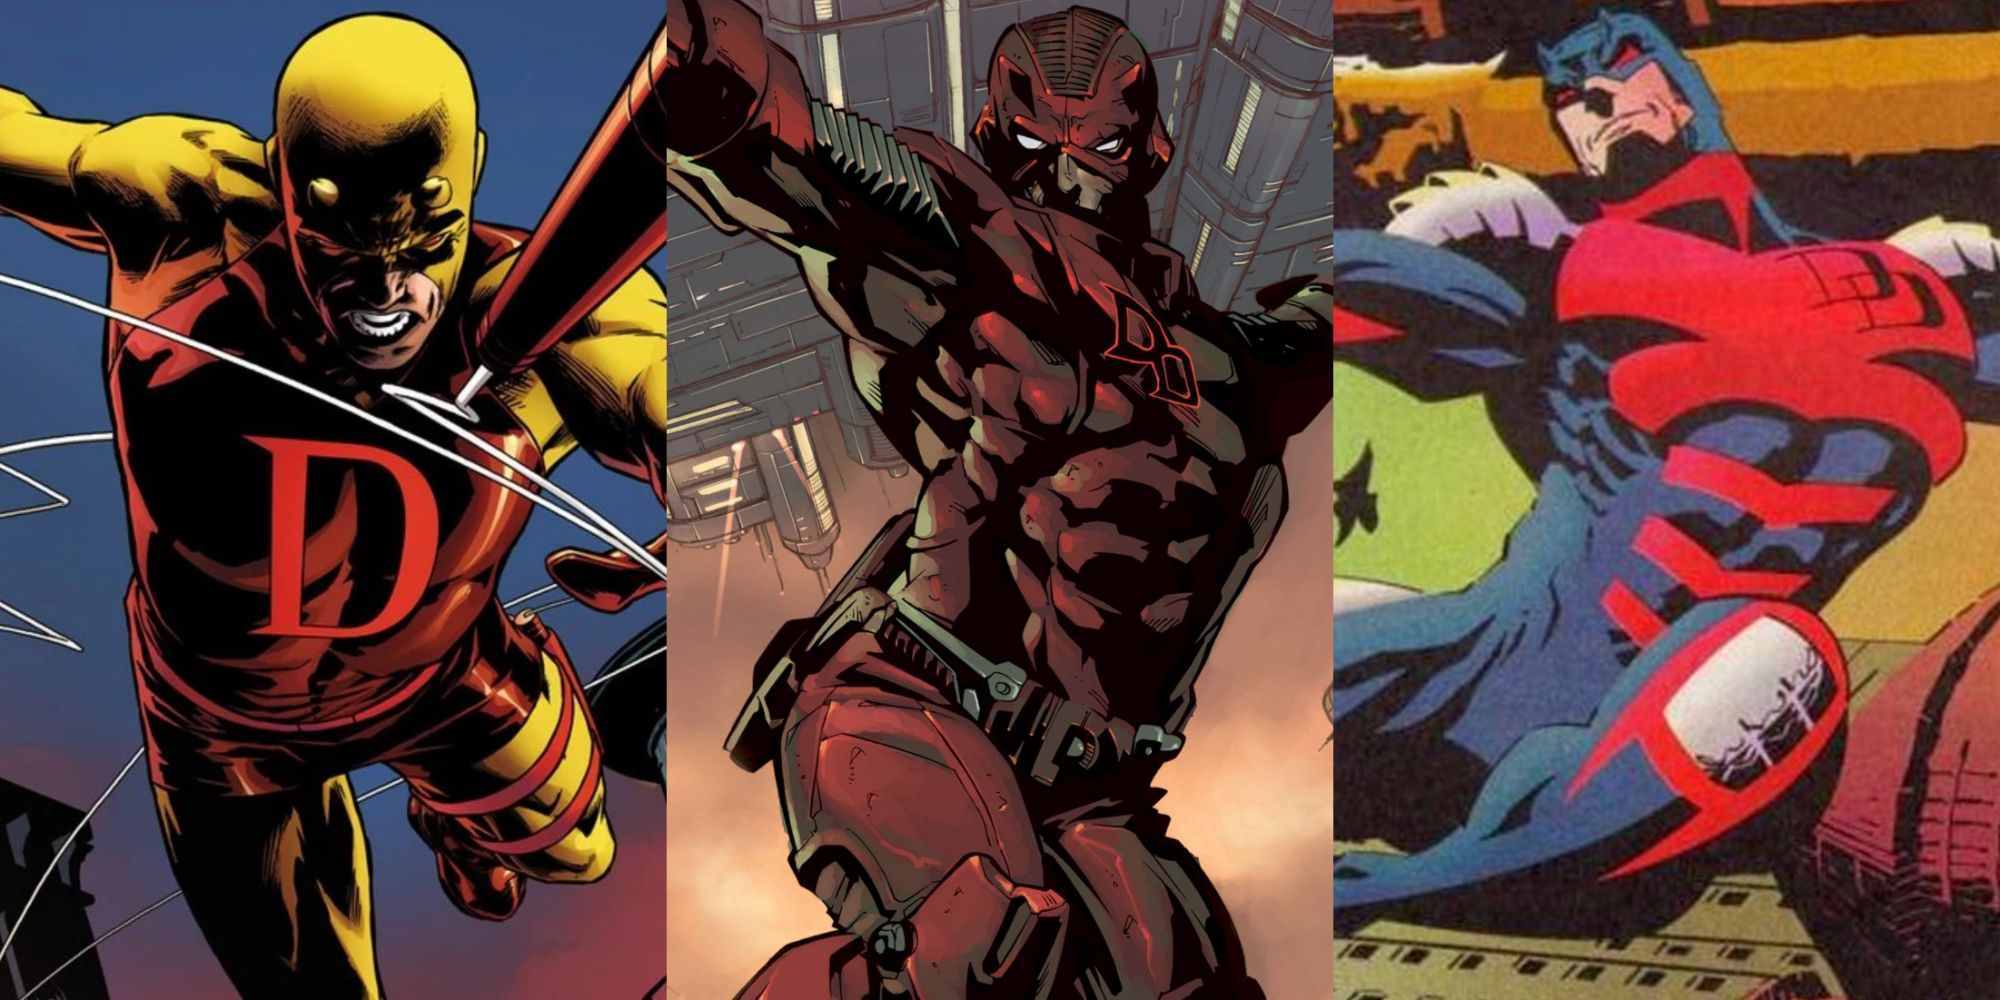 Split image of Daredevil in various costumes from the comics